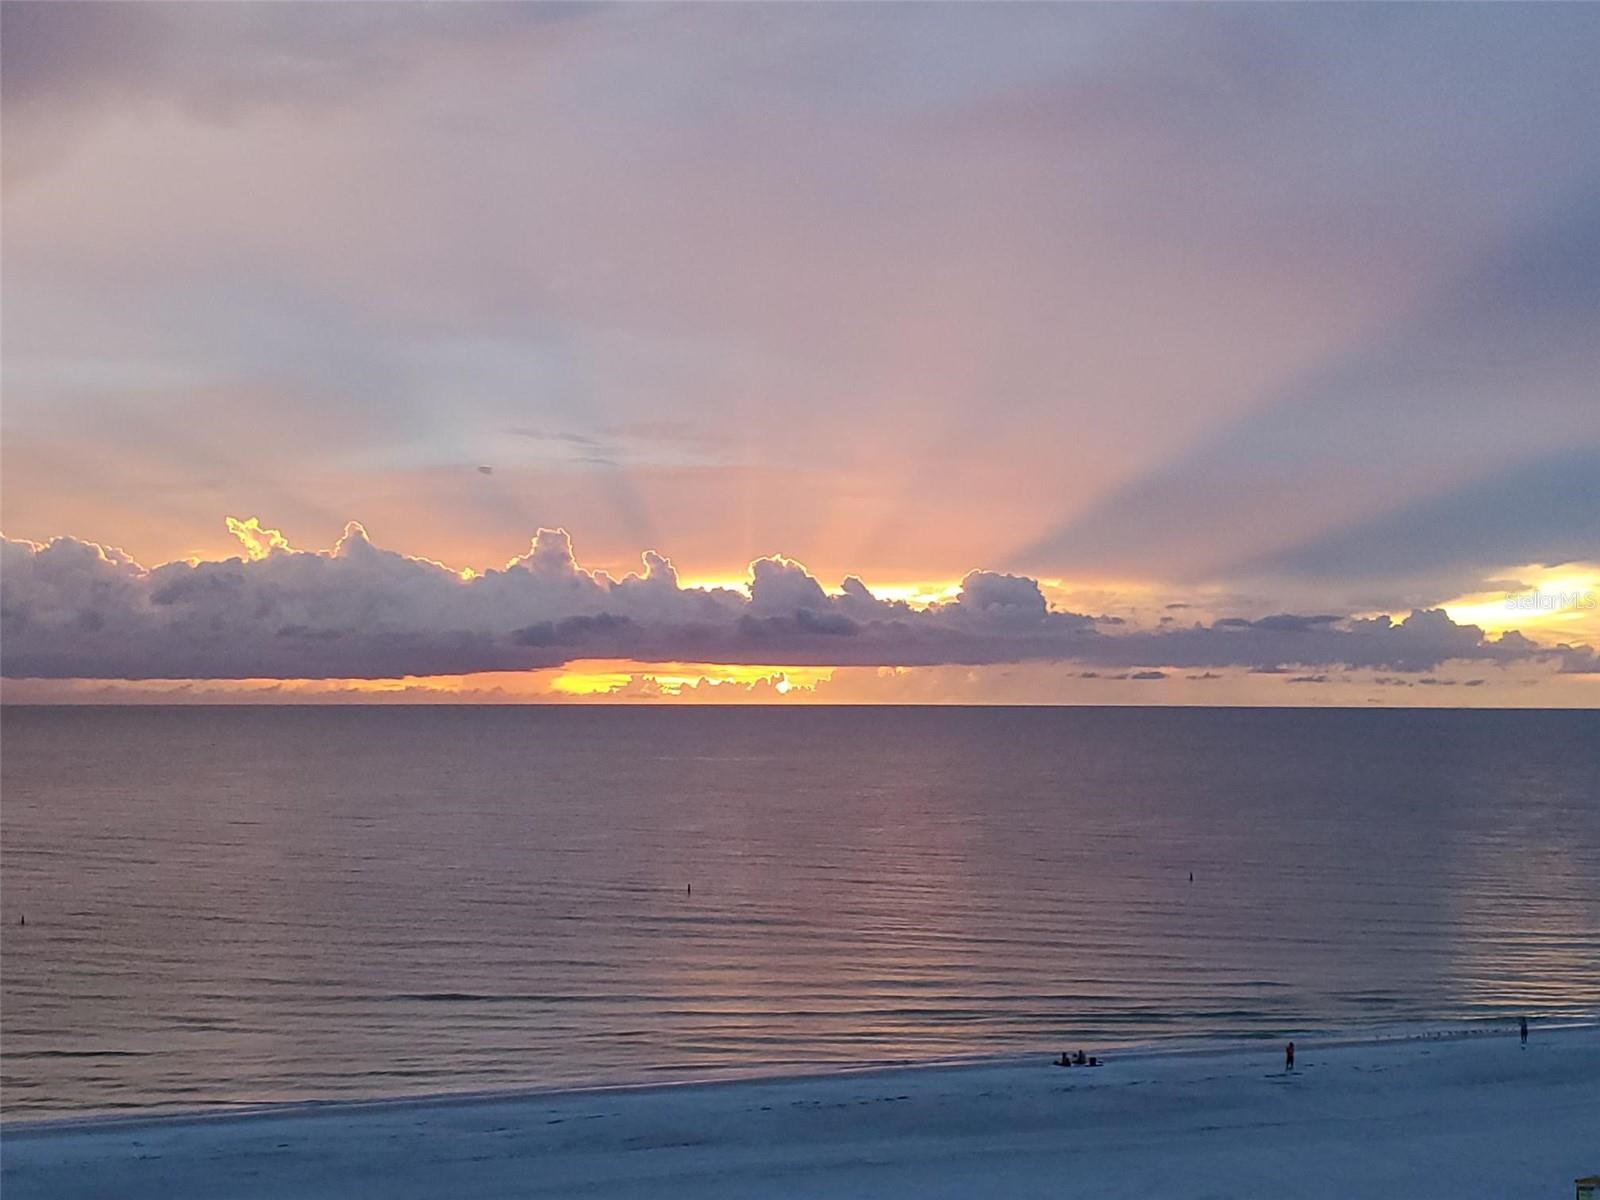 Vistas of slick calm waters on the Gulf of Mexico as the day comes to an end are a fabulous way to end your day.